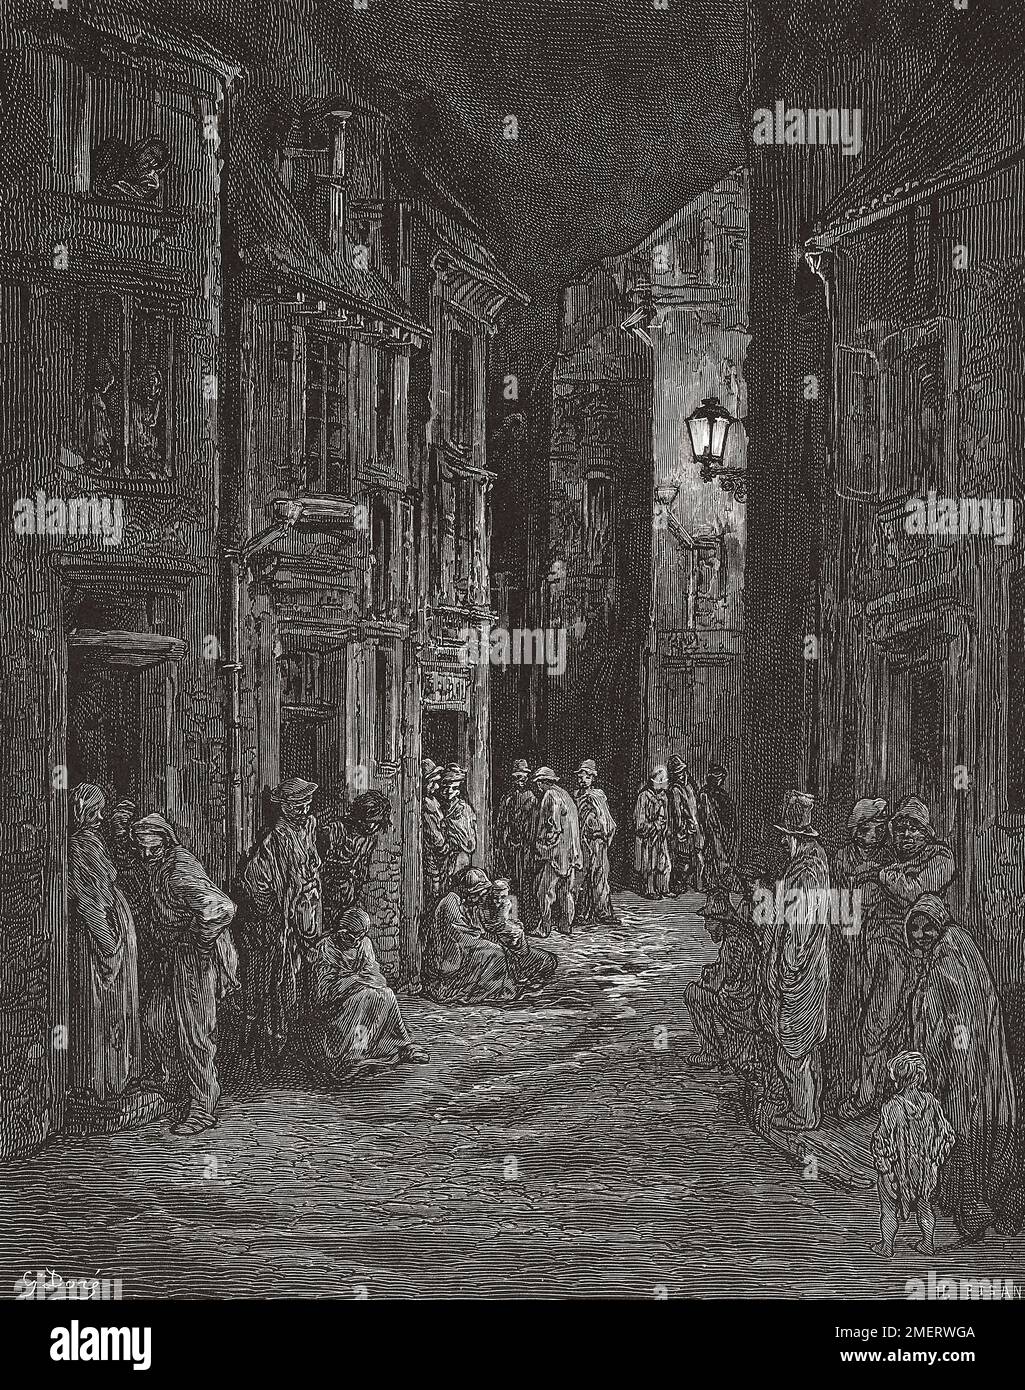 Bluegate Fields, Shadwell, one of the worst slums in London in the 19th century.  After an illustration by Gustave Doré in the 1890 American edition of London: A Pilgrimage written by Blanchard Jerrold and illustrated by Gustave Doré. Stock Photo